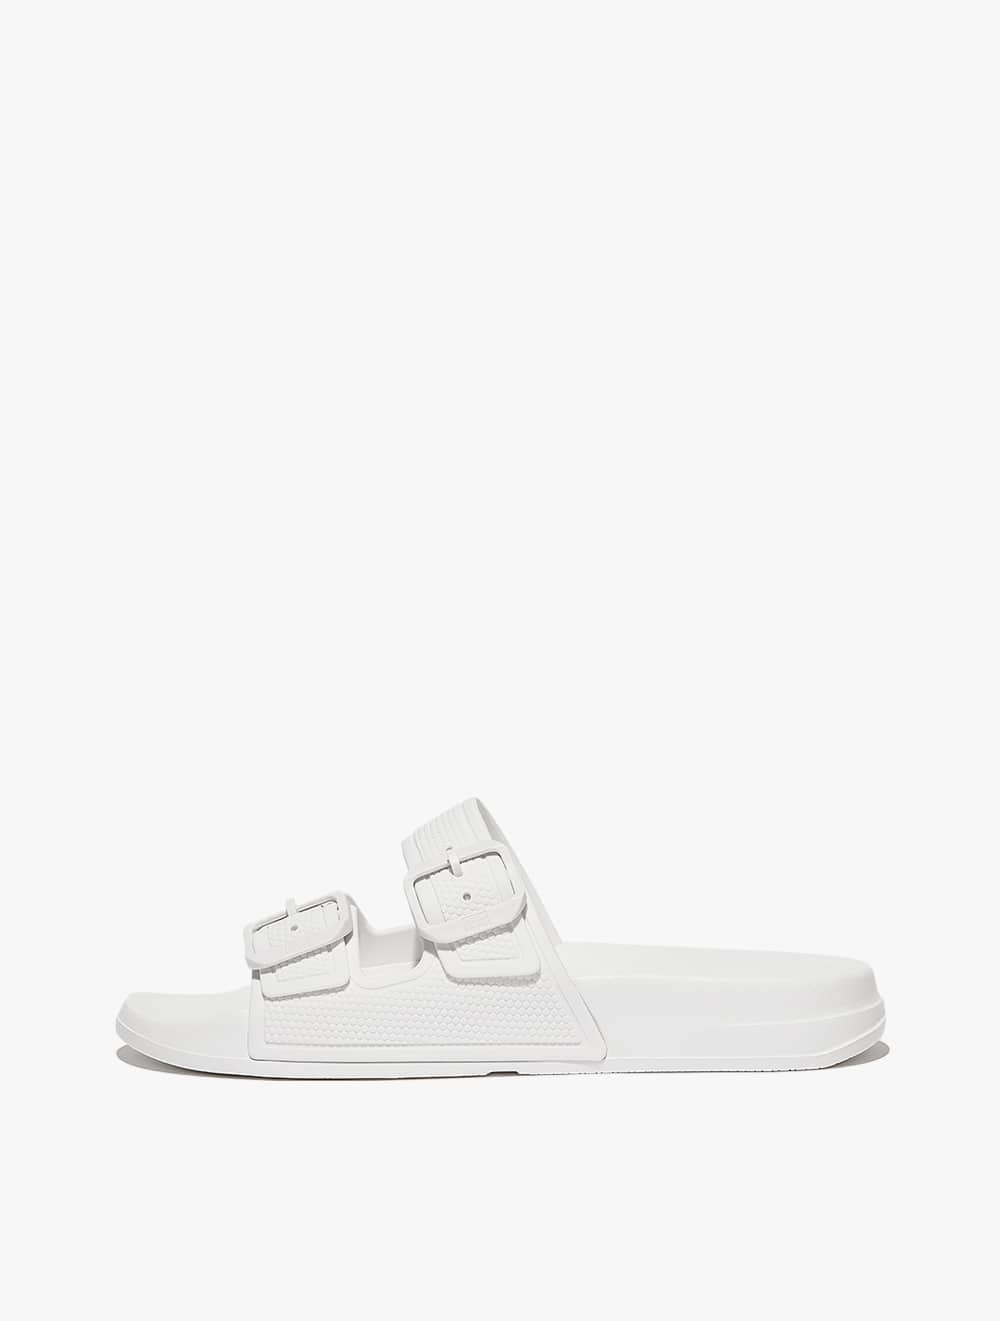 FITFLOP IQUSHION TWO-BAR BUCKLE WOMEN'S SLIDES- Urban White